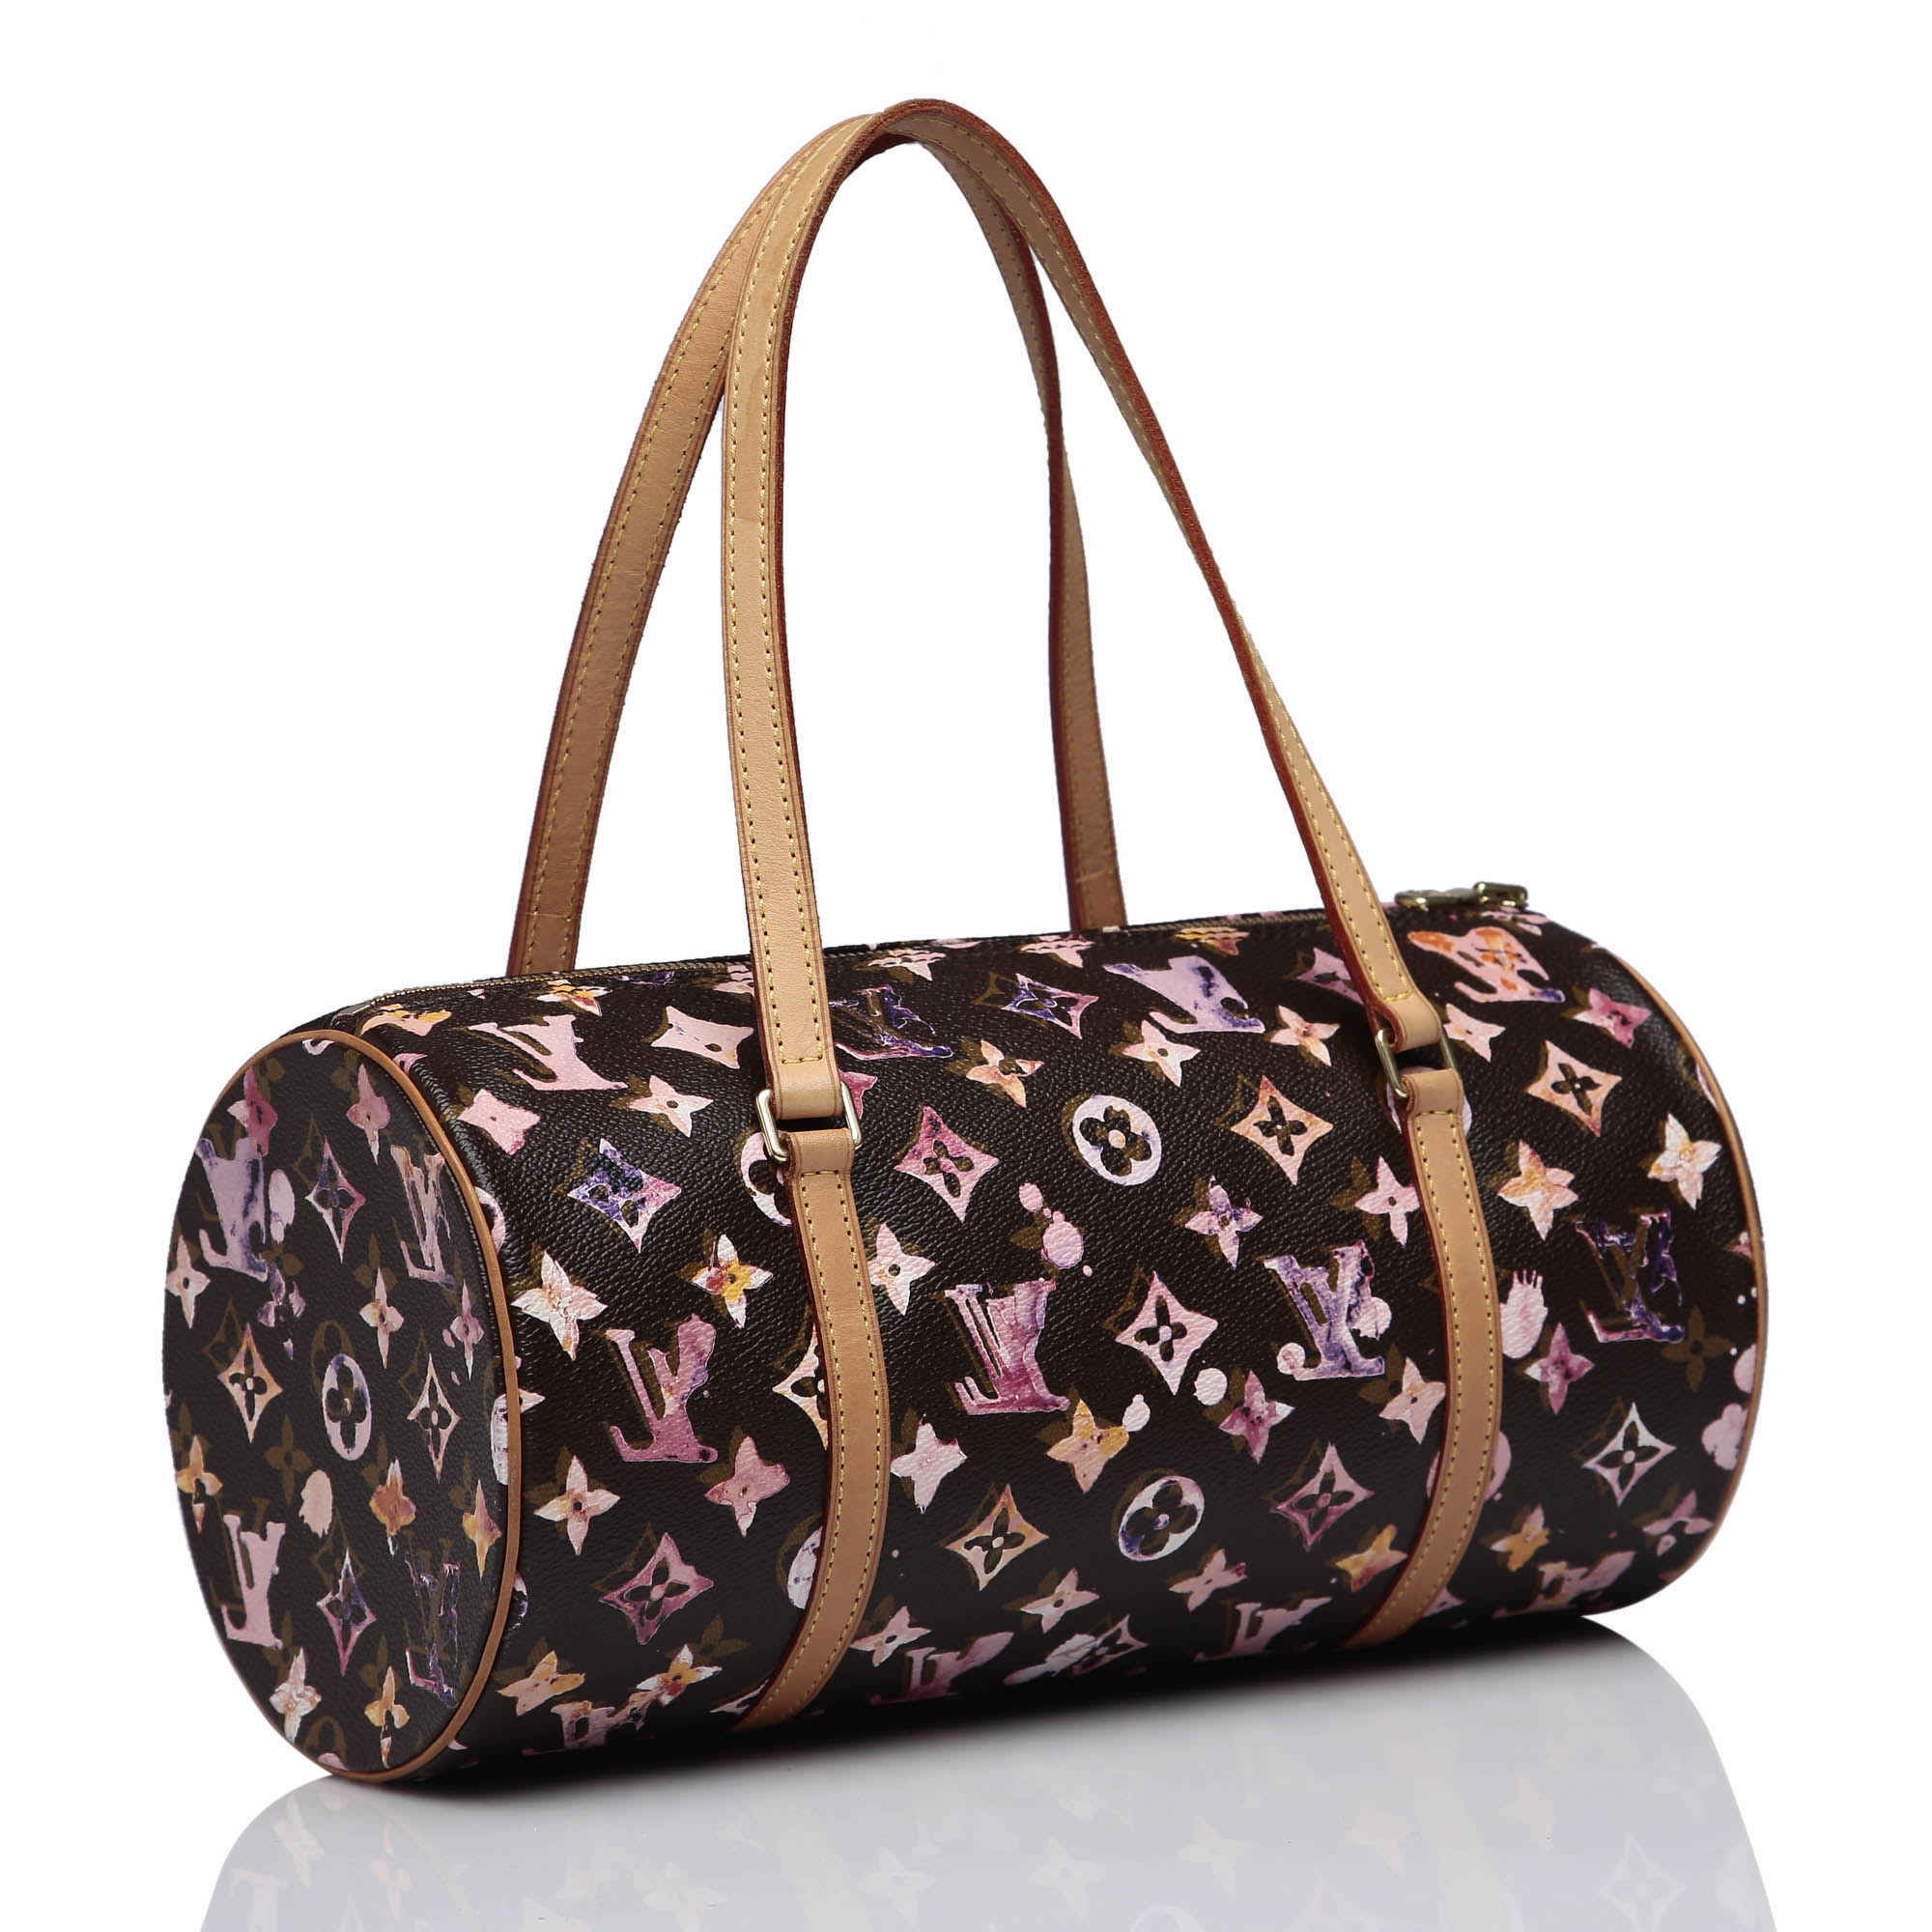 Buy Vuitton Vintage Bag Online In India -  India